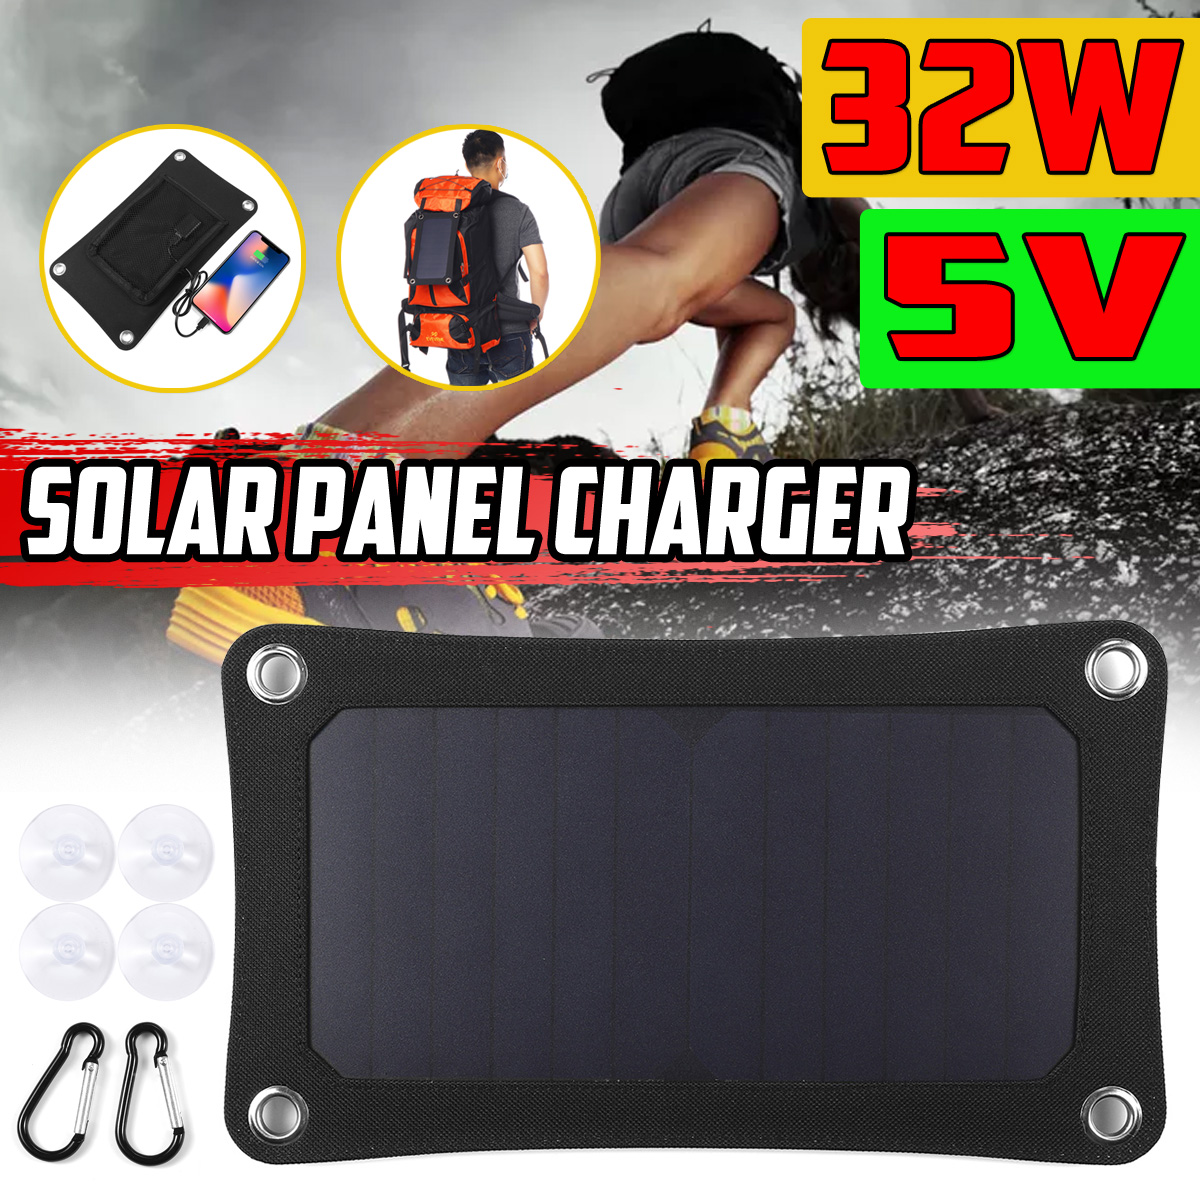 SUNPOWER-32W-5V-High-Efficiency-Solar-Panel-Charger-USB-Backpack-Solar-Power-Bank-for-Outdoor-Campin-1726253-1